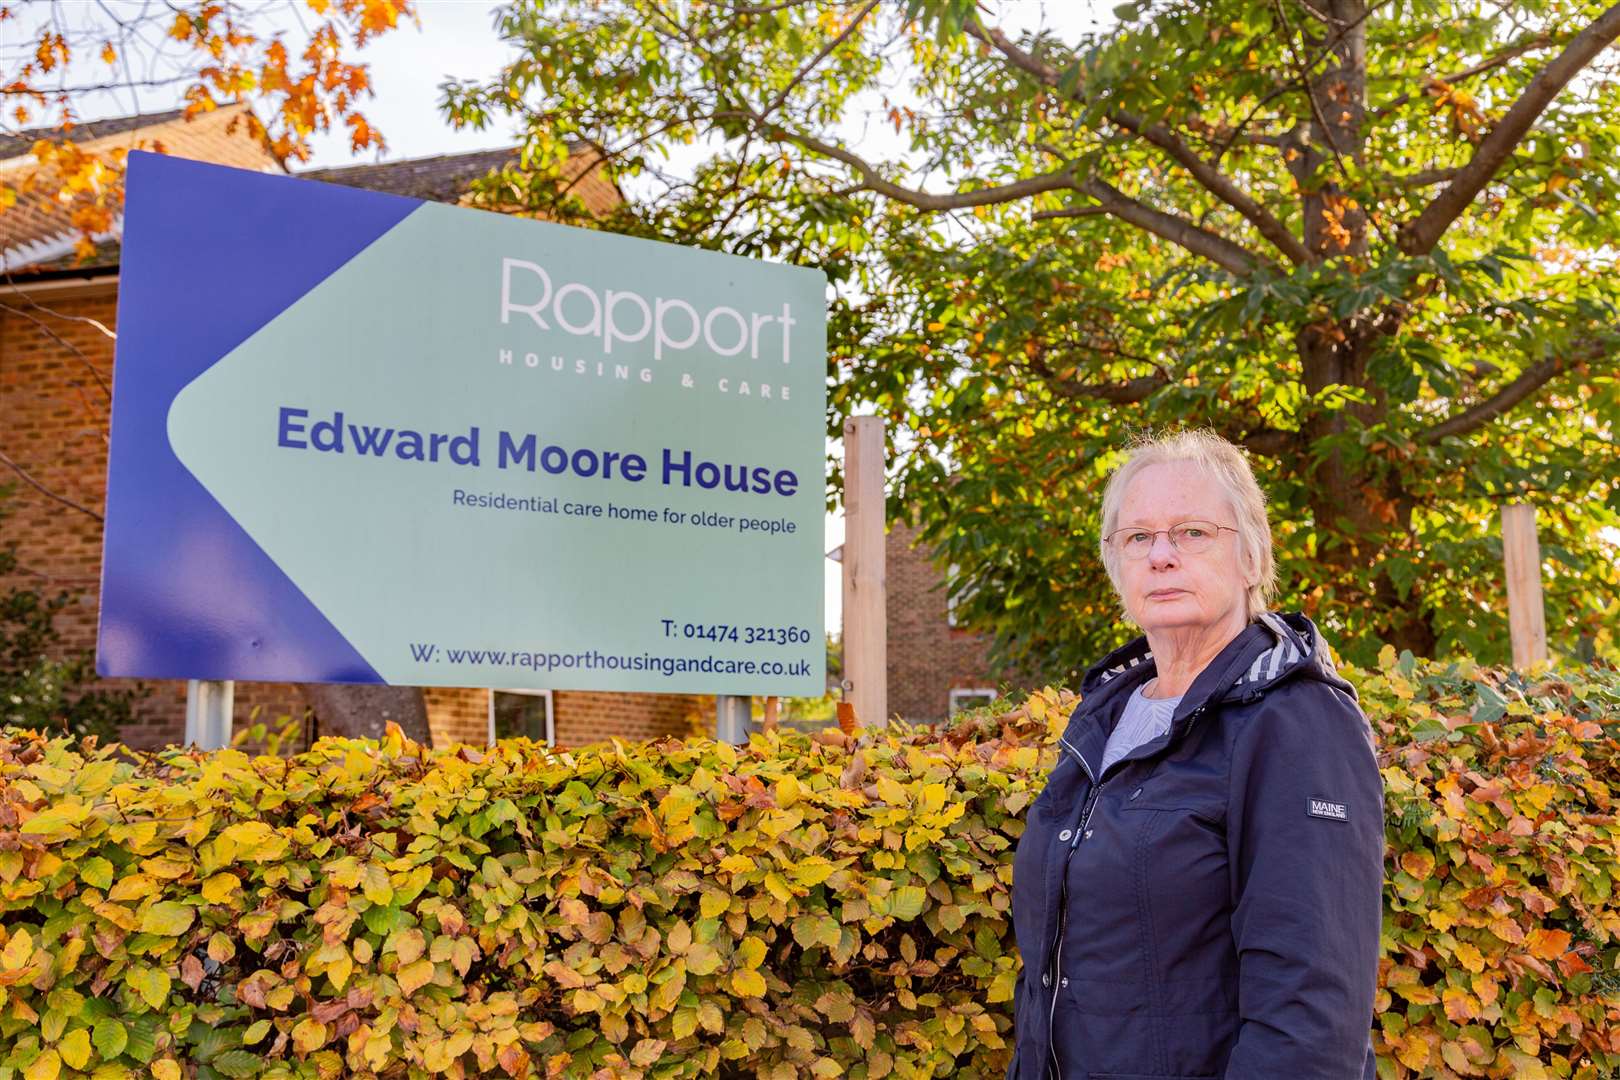 Cllr Lyn Milner, whose mum is a resident at Edward Moore House